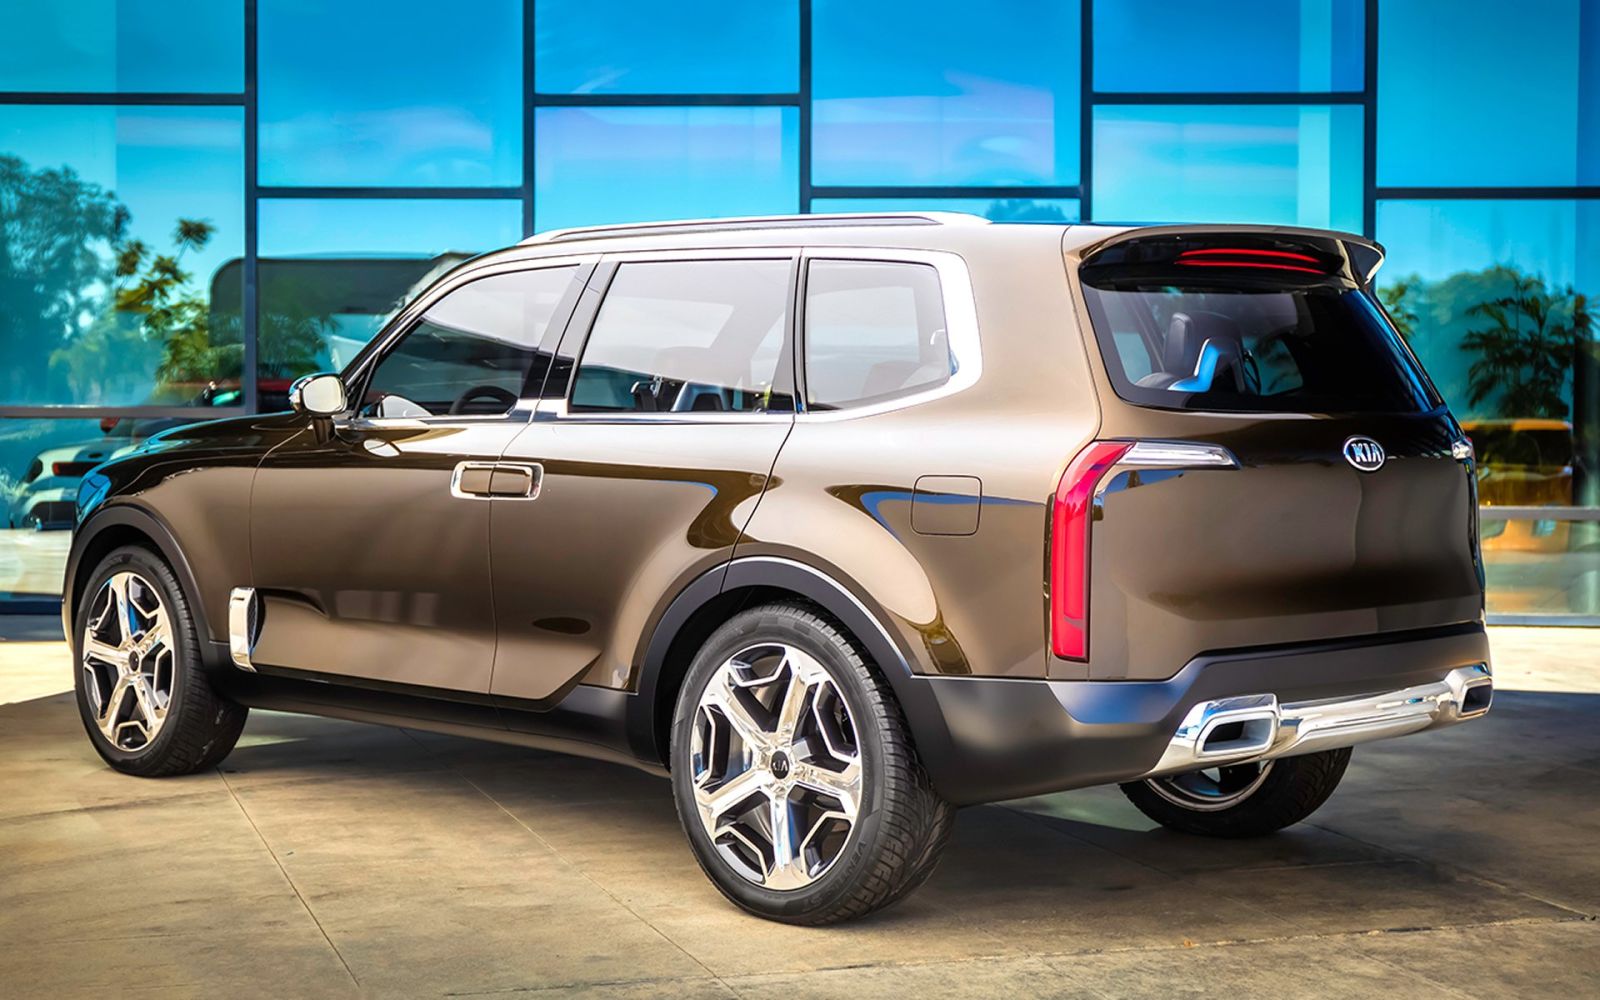 Illustration for article titled Remember the Kia Telluride? Heres how the production version looks uncovered